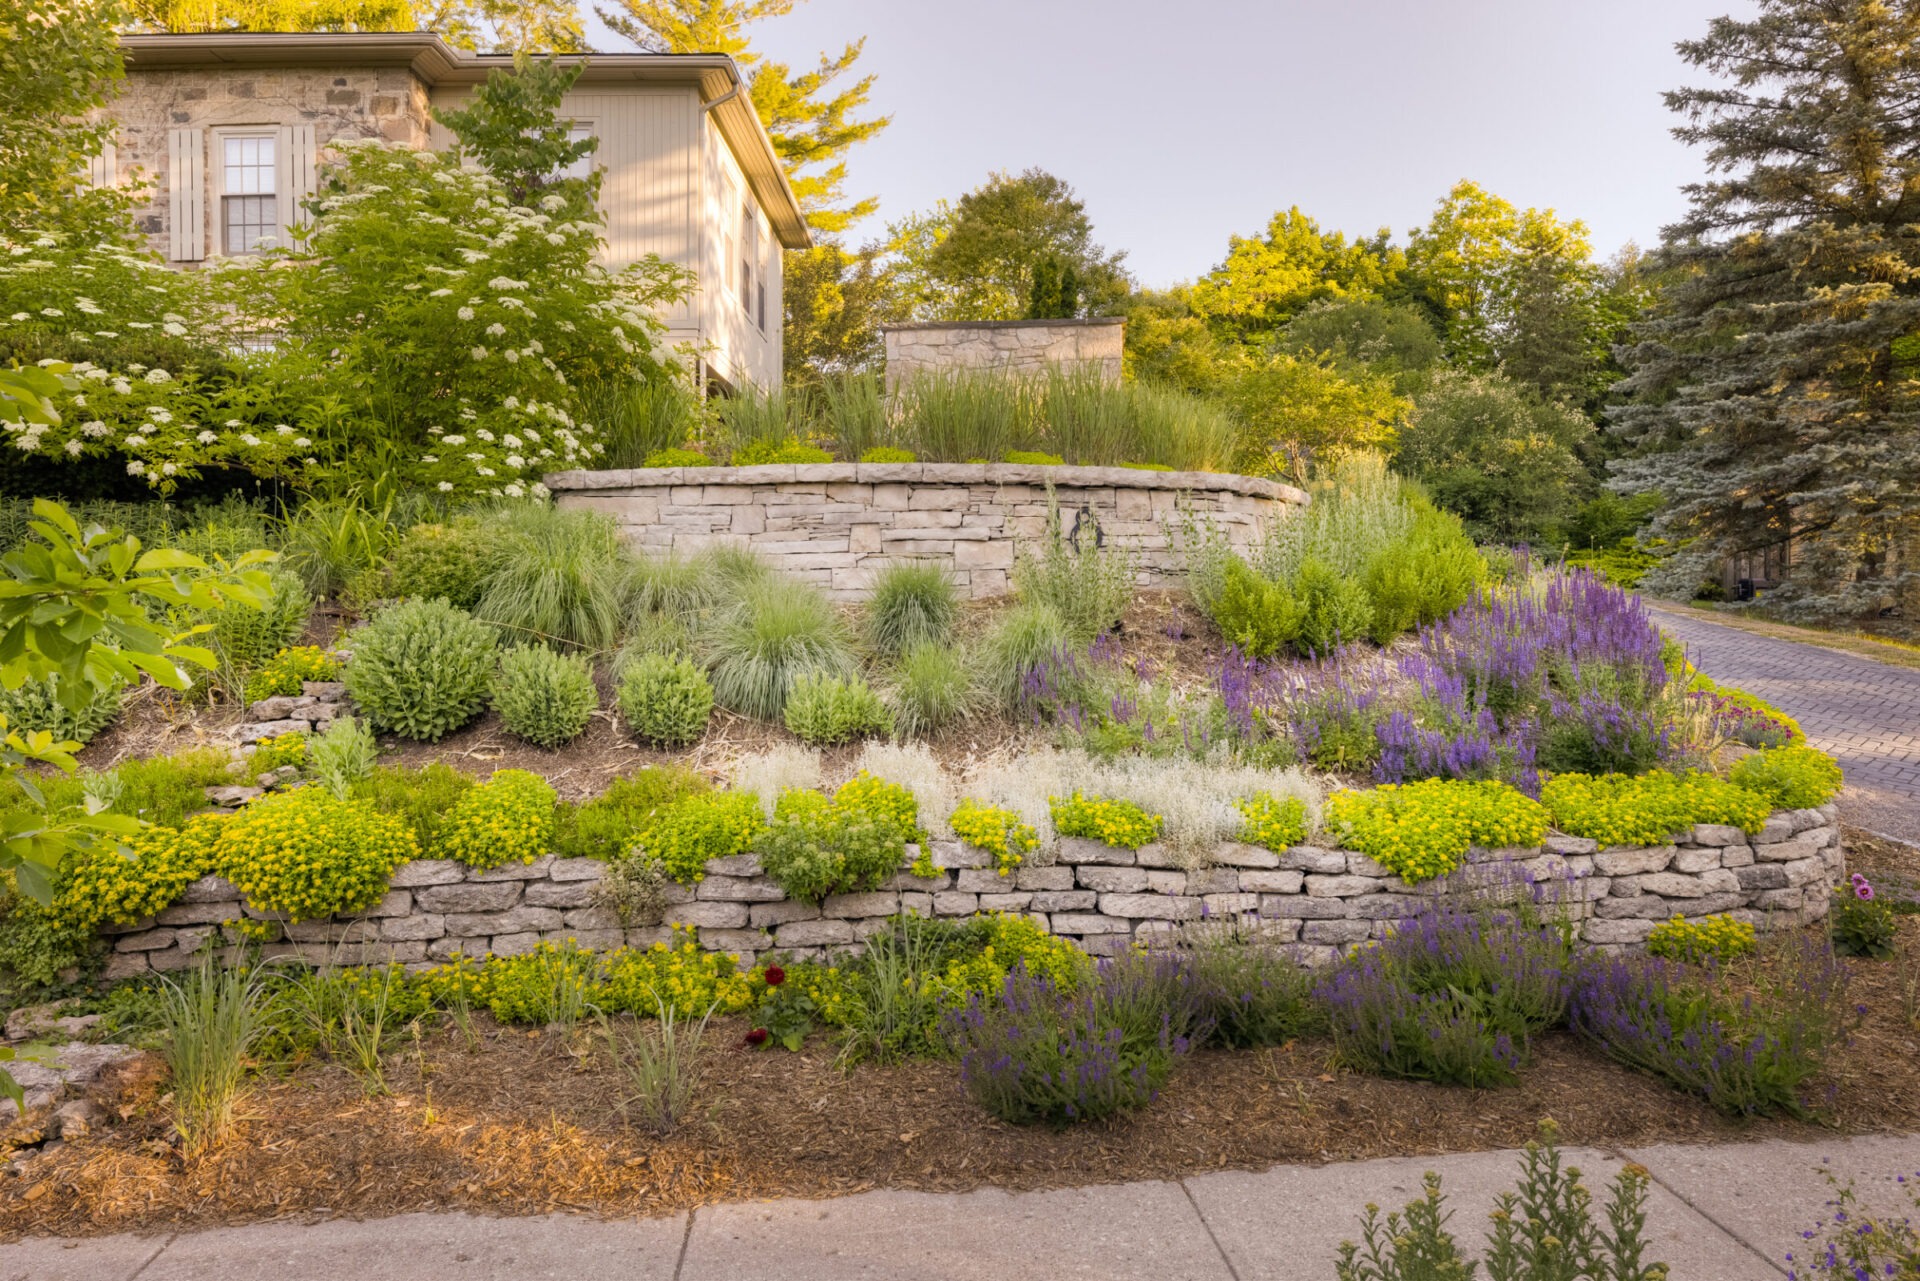 This image shows a well-manicured garden with tiered stone walls, colorful flowers, lush greenery, and a backdrop of a house and trees.